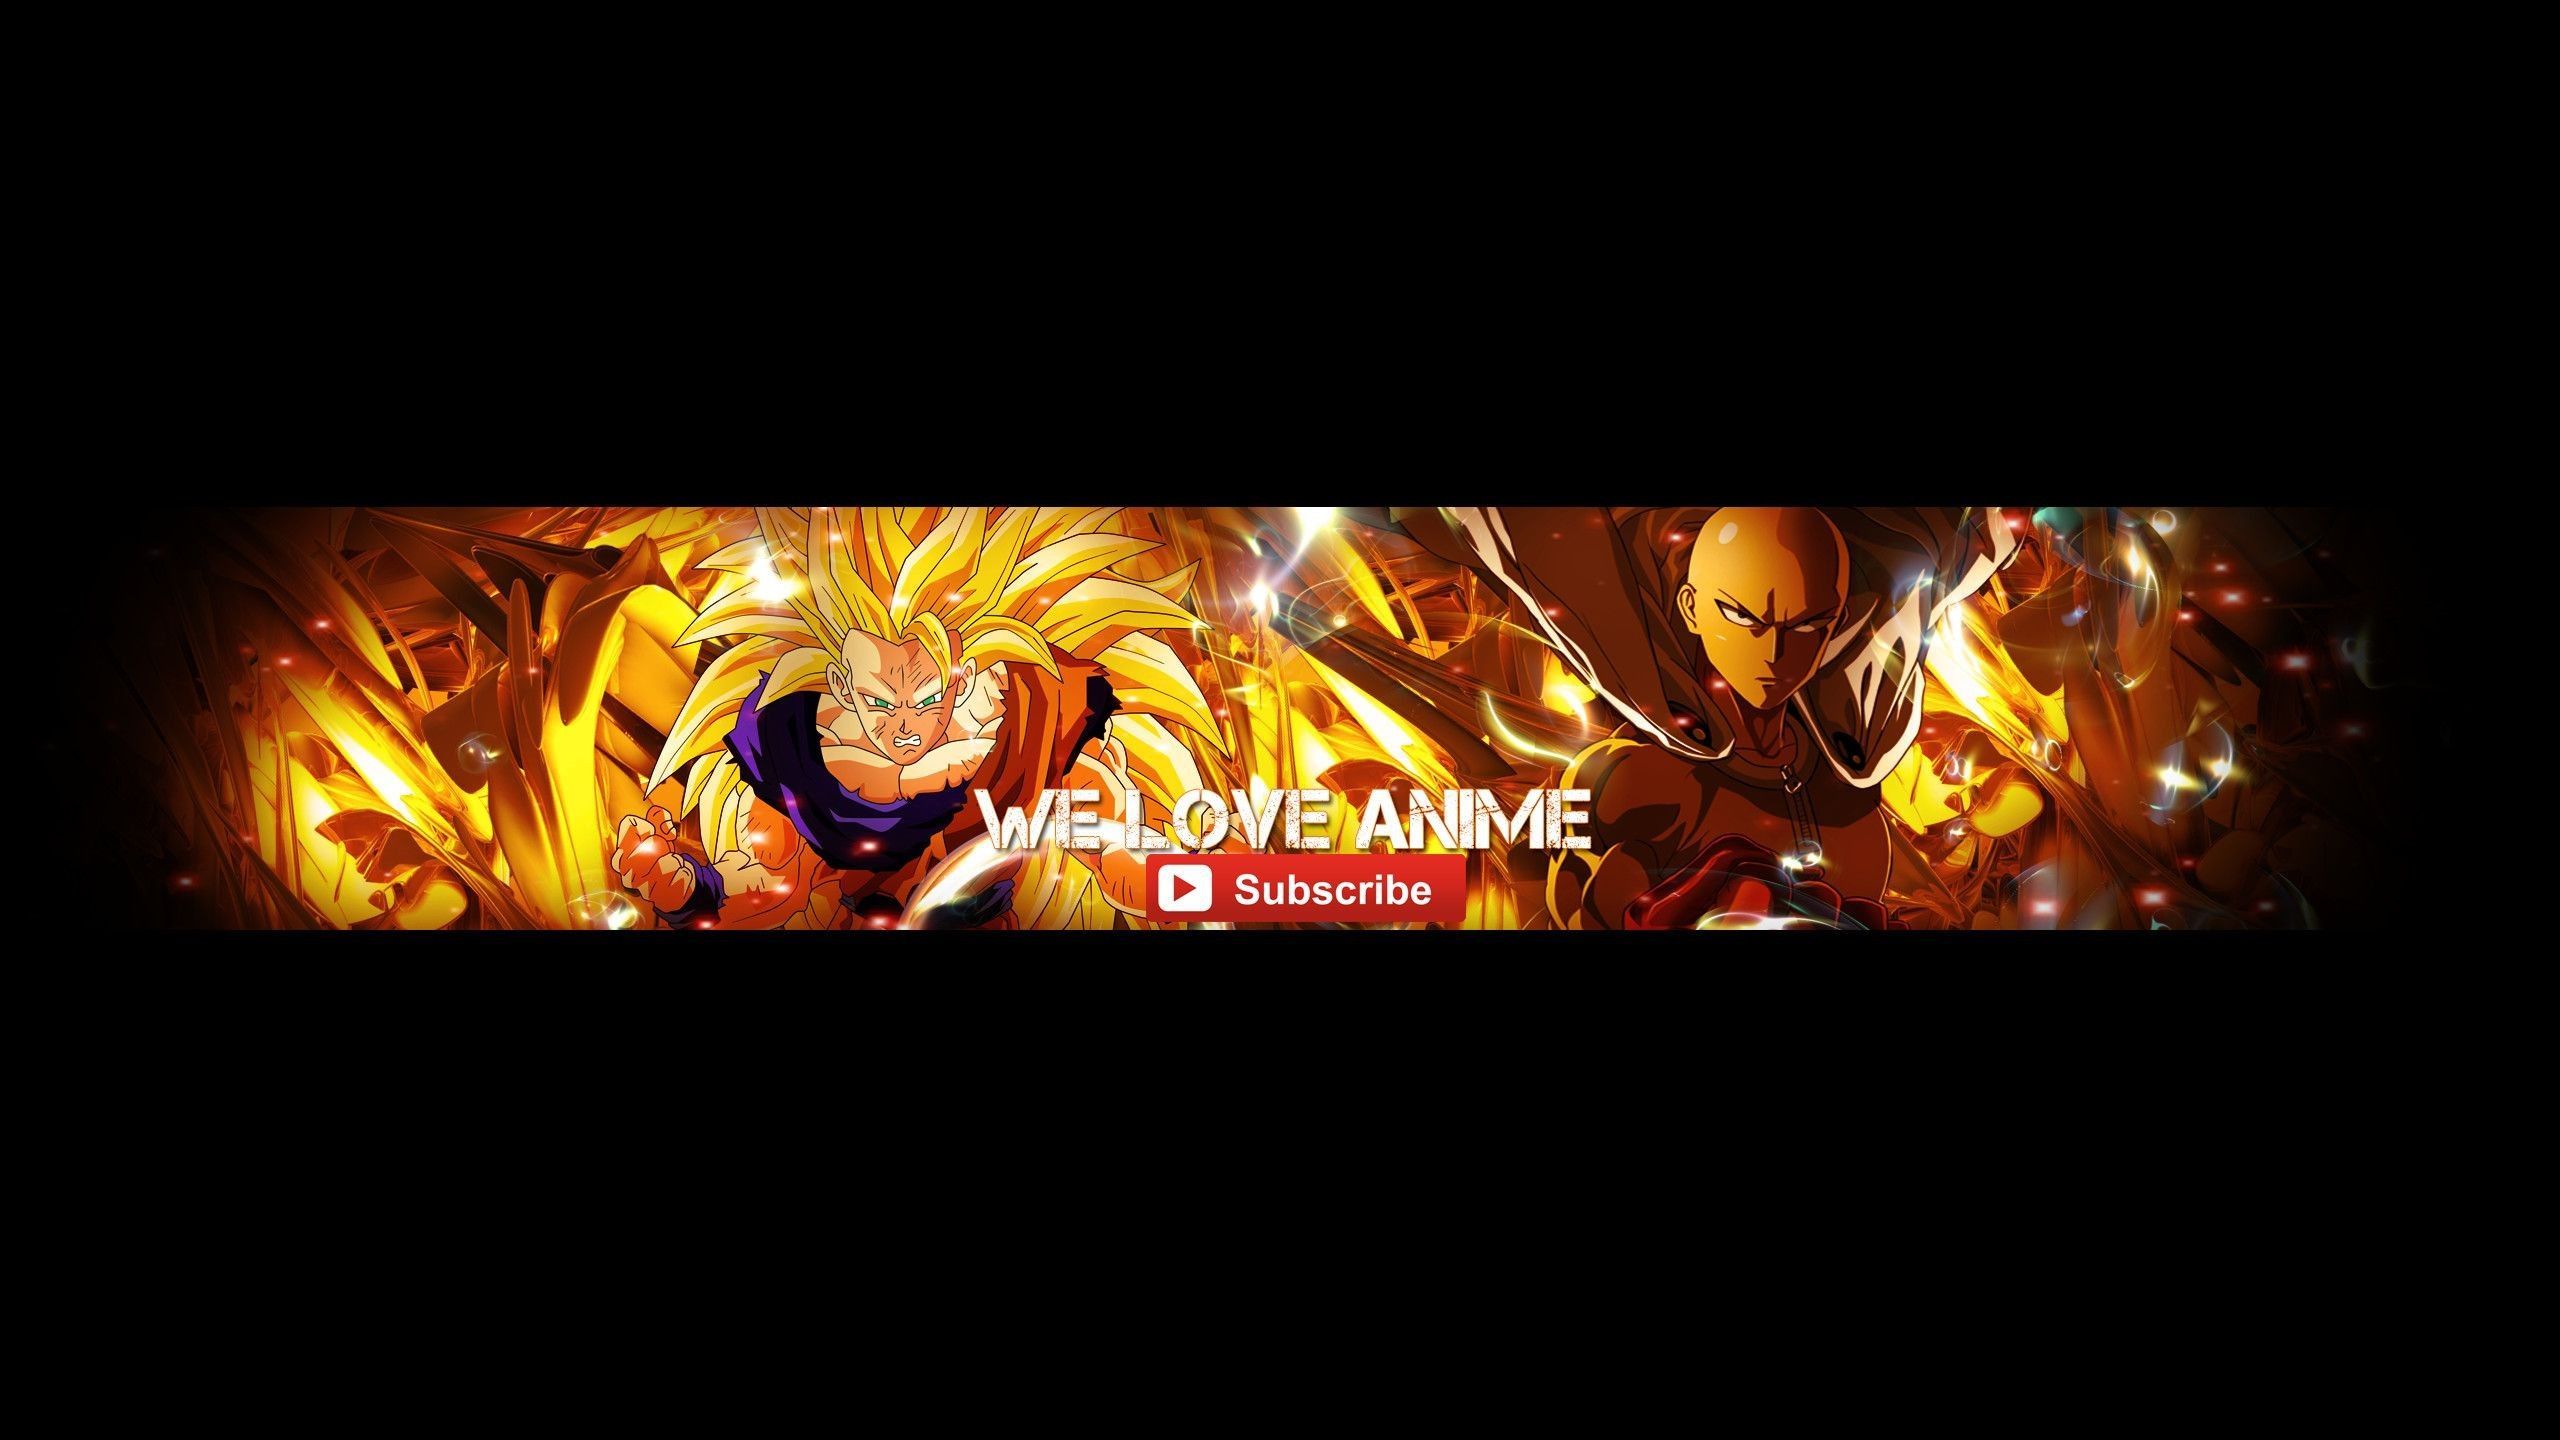 Youtube Banner Anime Is Youtube Banner Anime The Most Trending Thing Now?. Youtube channel art, Youtube banners, Youtube banner background